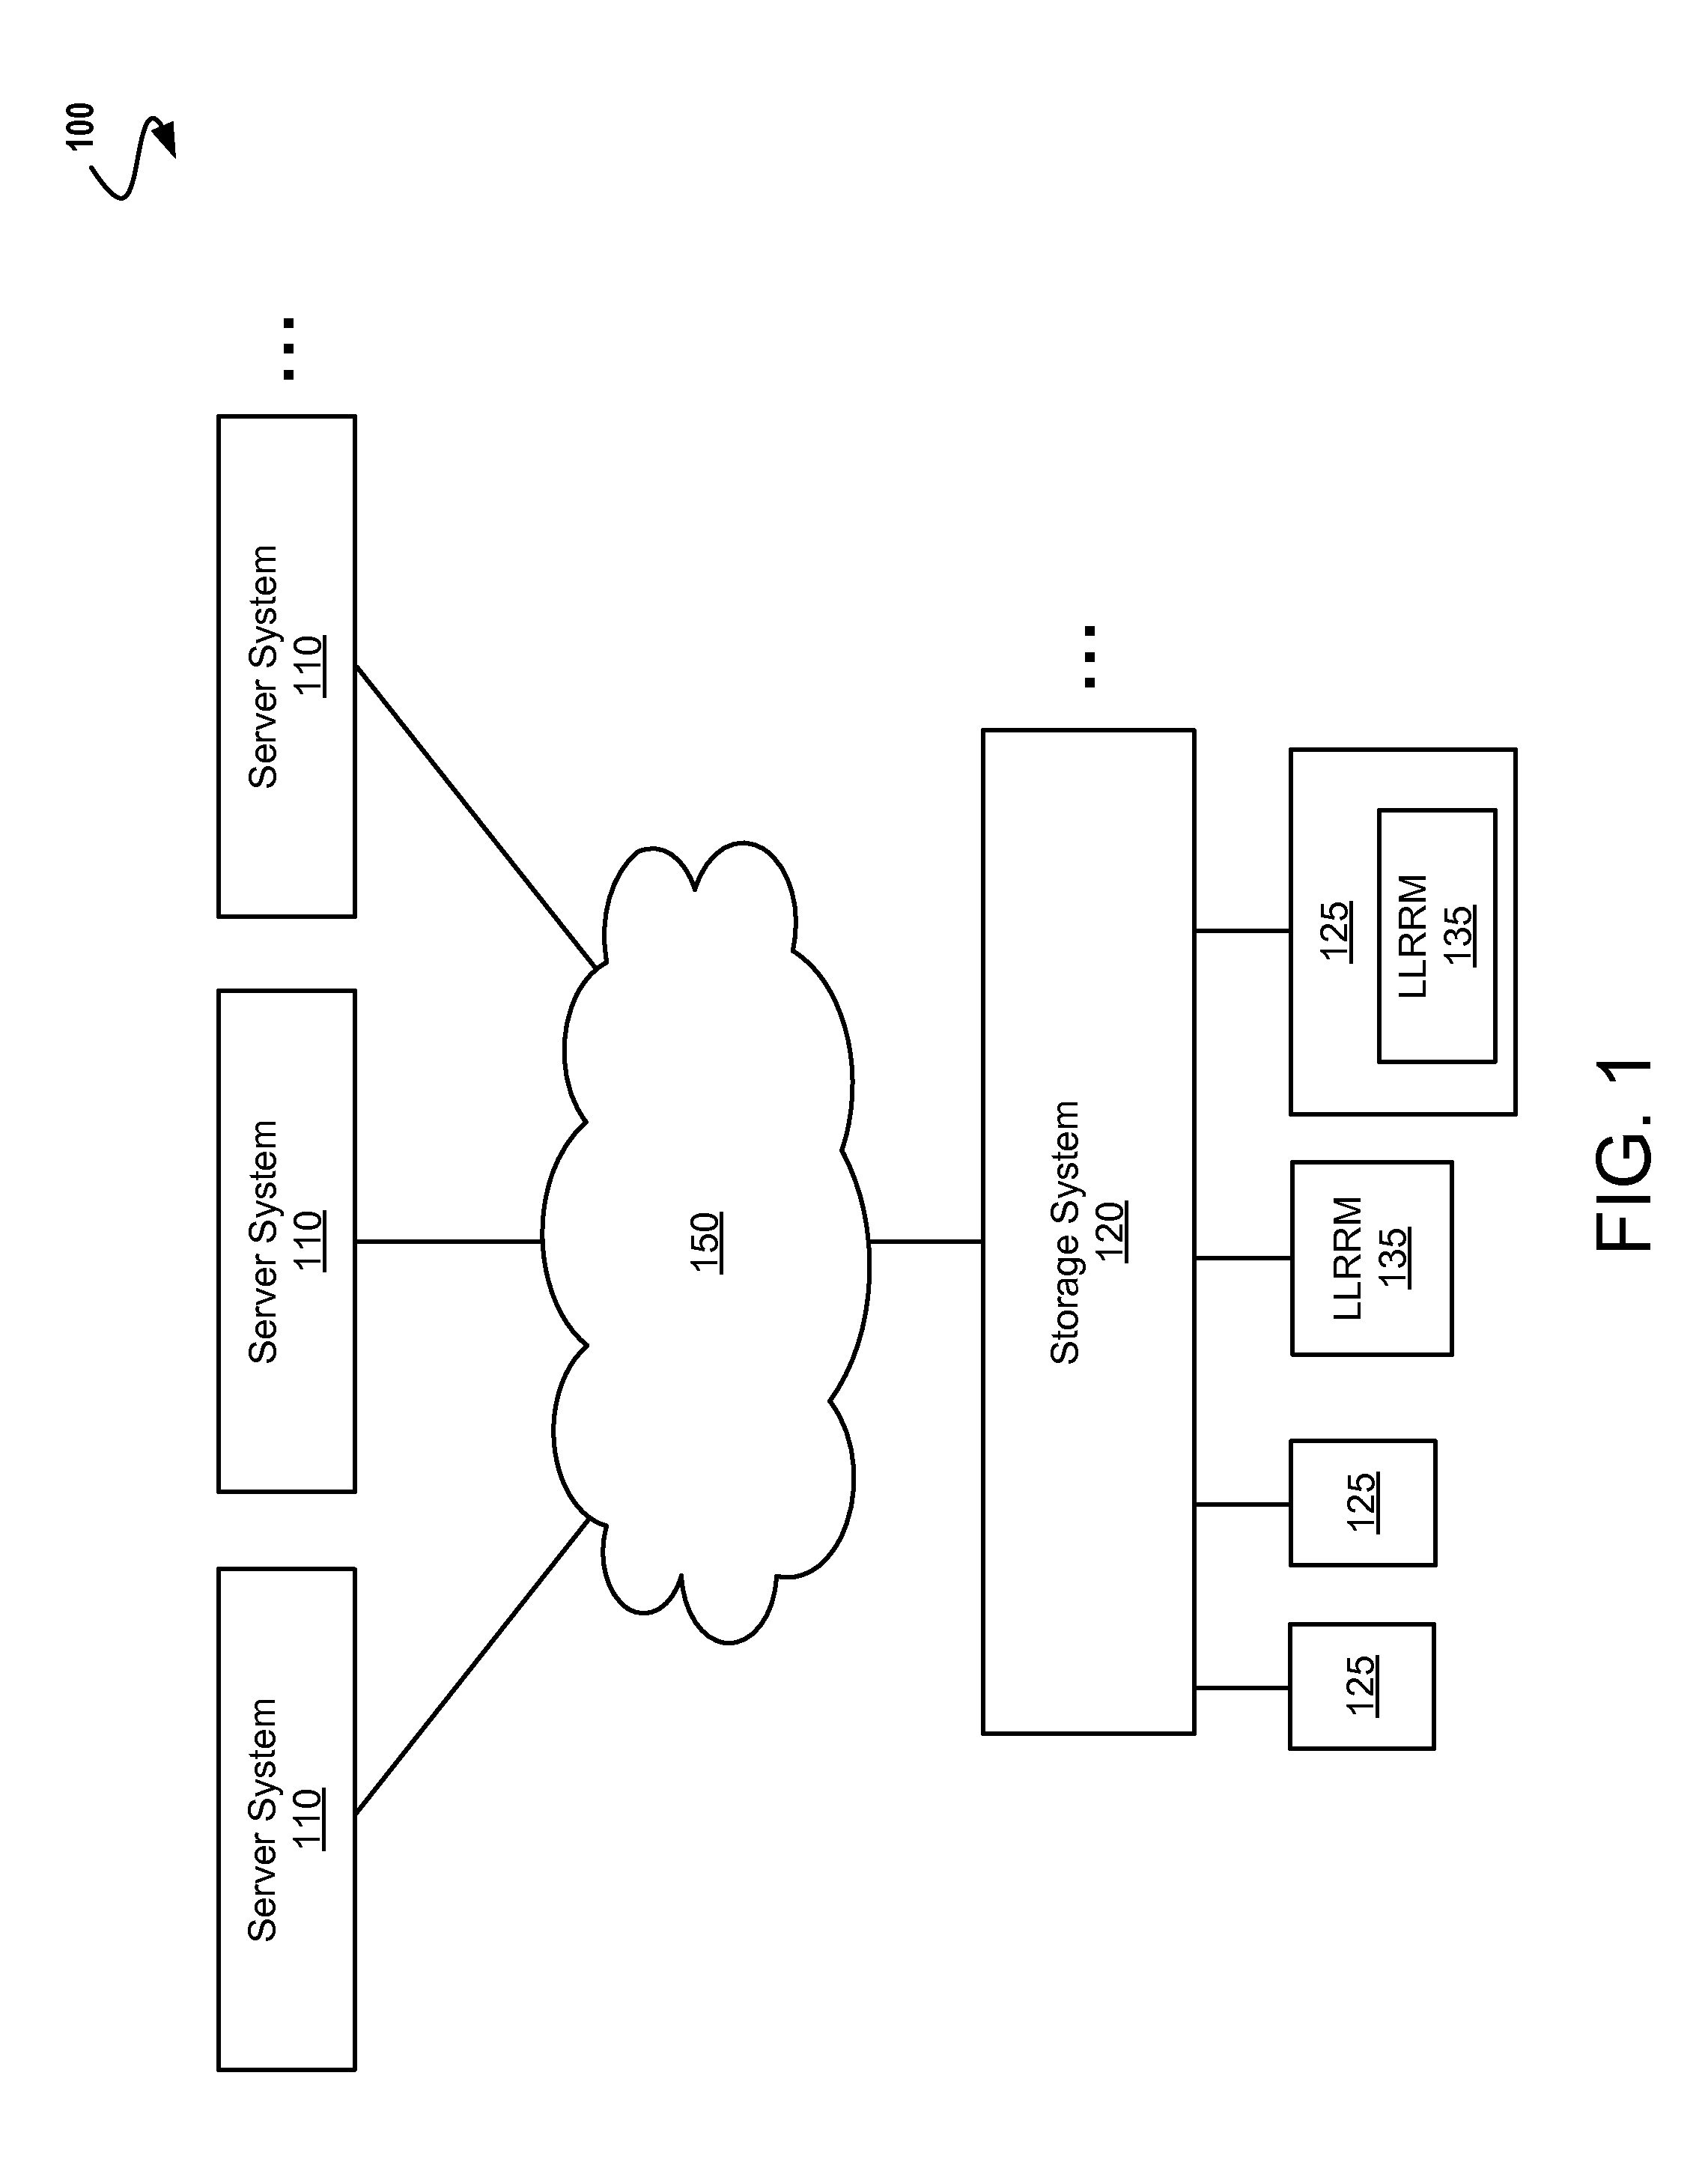 Scheduling access requests for a multi-bank low-latency random read memory device